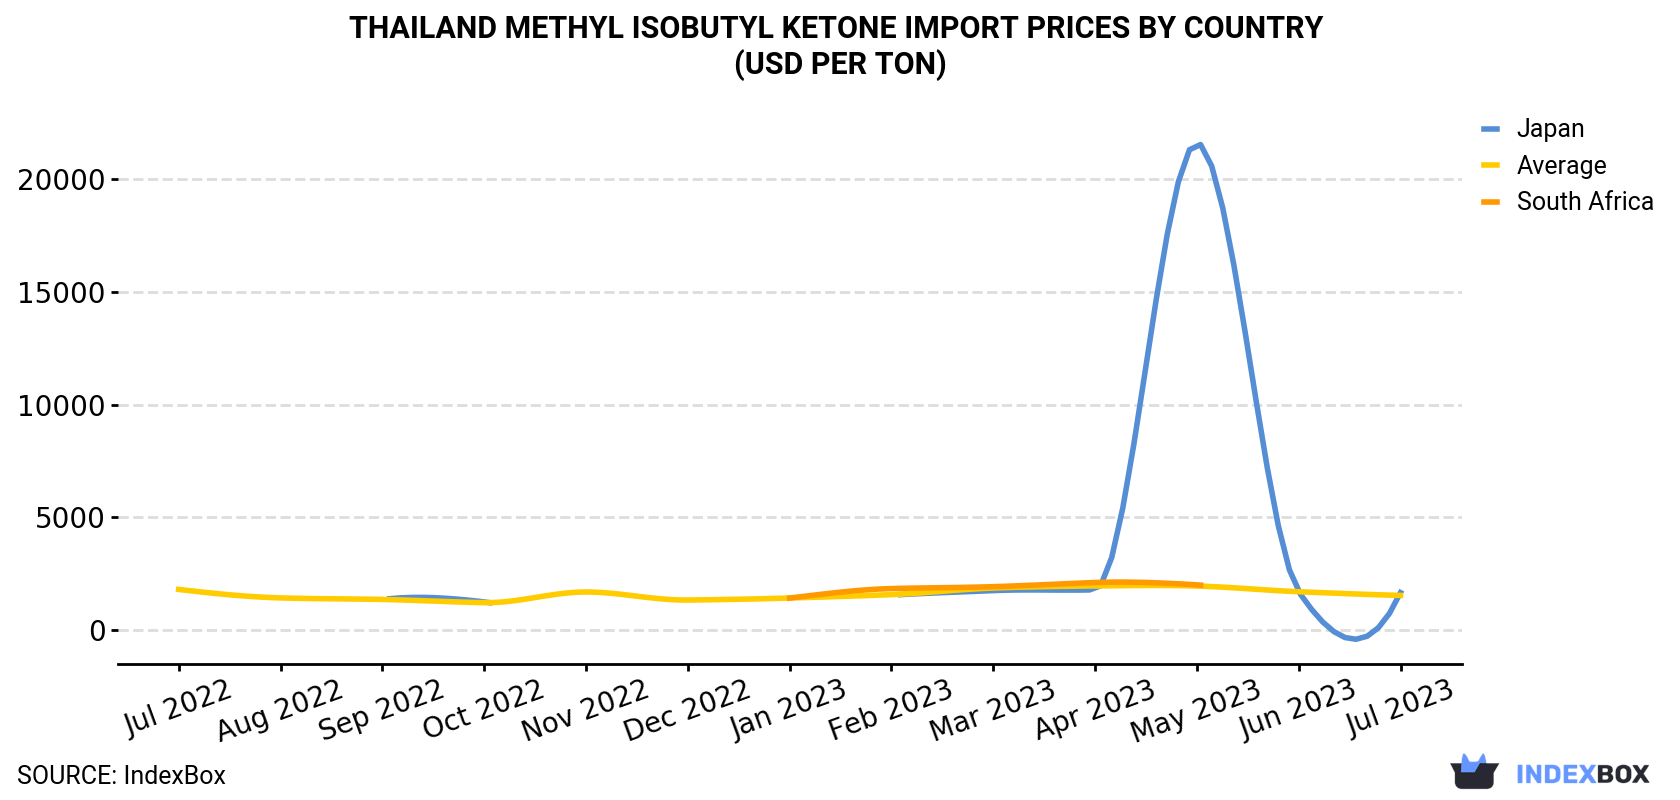 Thailand Methyl Isobutyl Ketone Import Prices By Country (USD Per Ton)